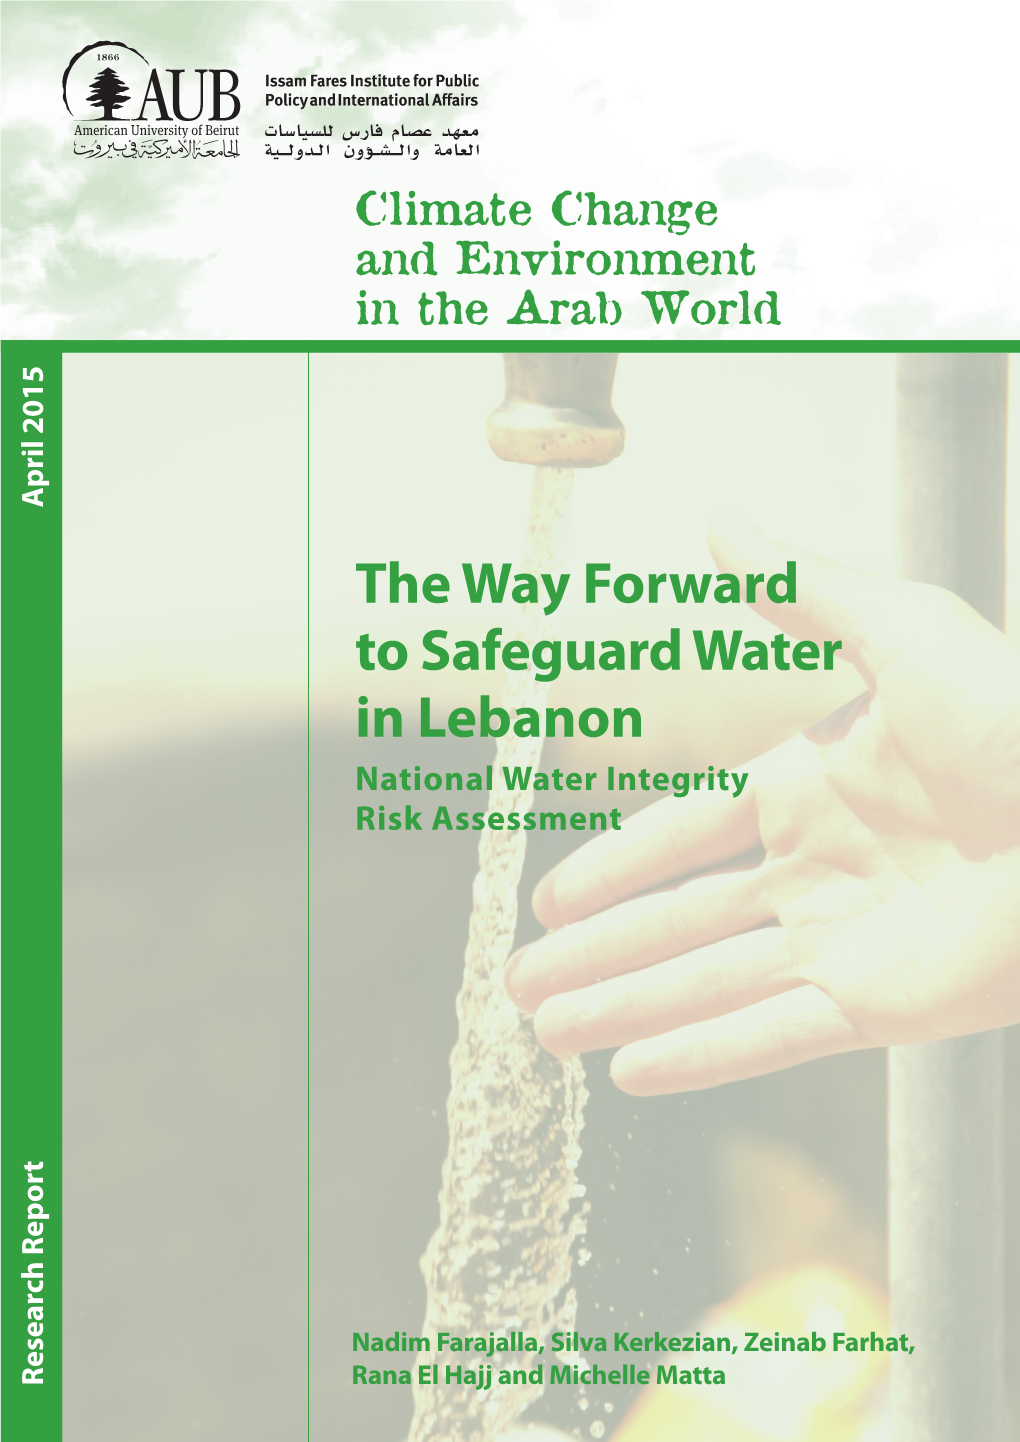 The Way Forward to Safeguard Water in Lebanon National Water Integrity